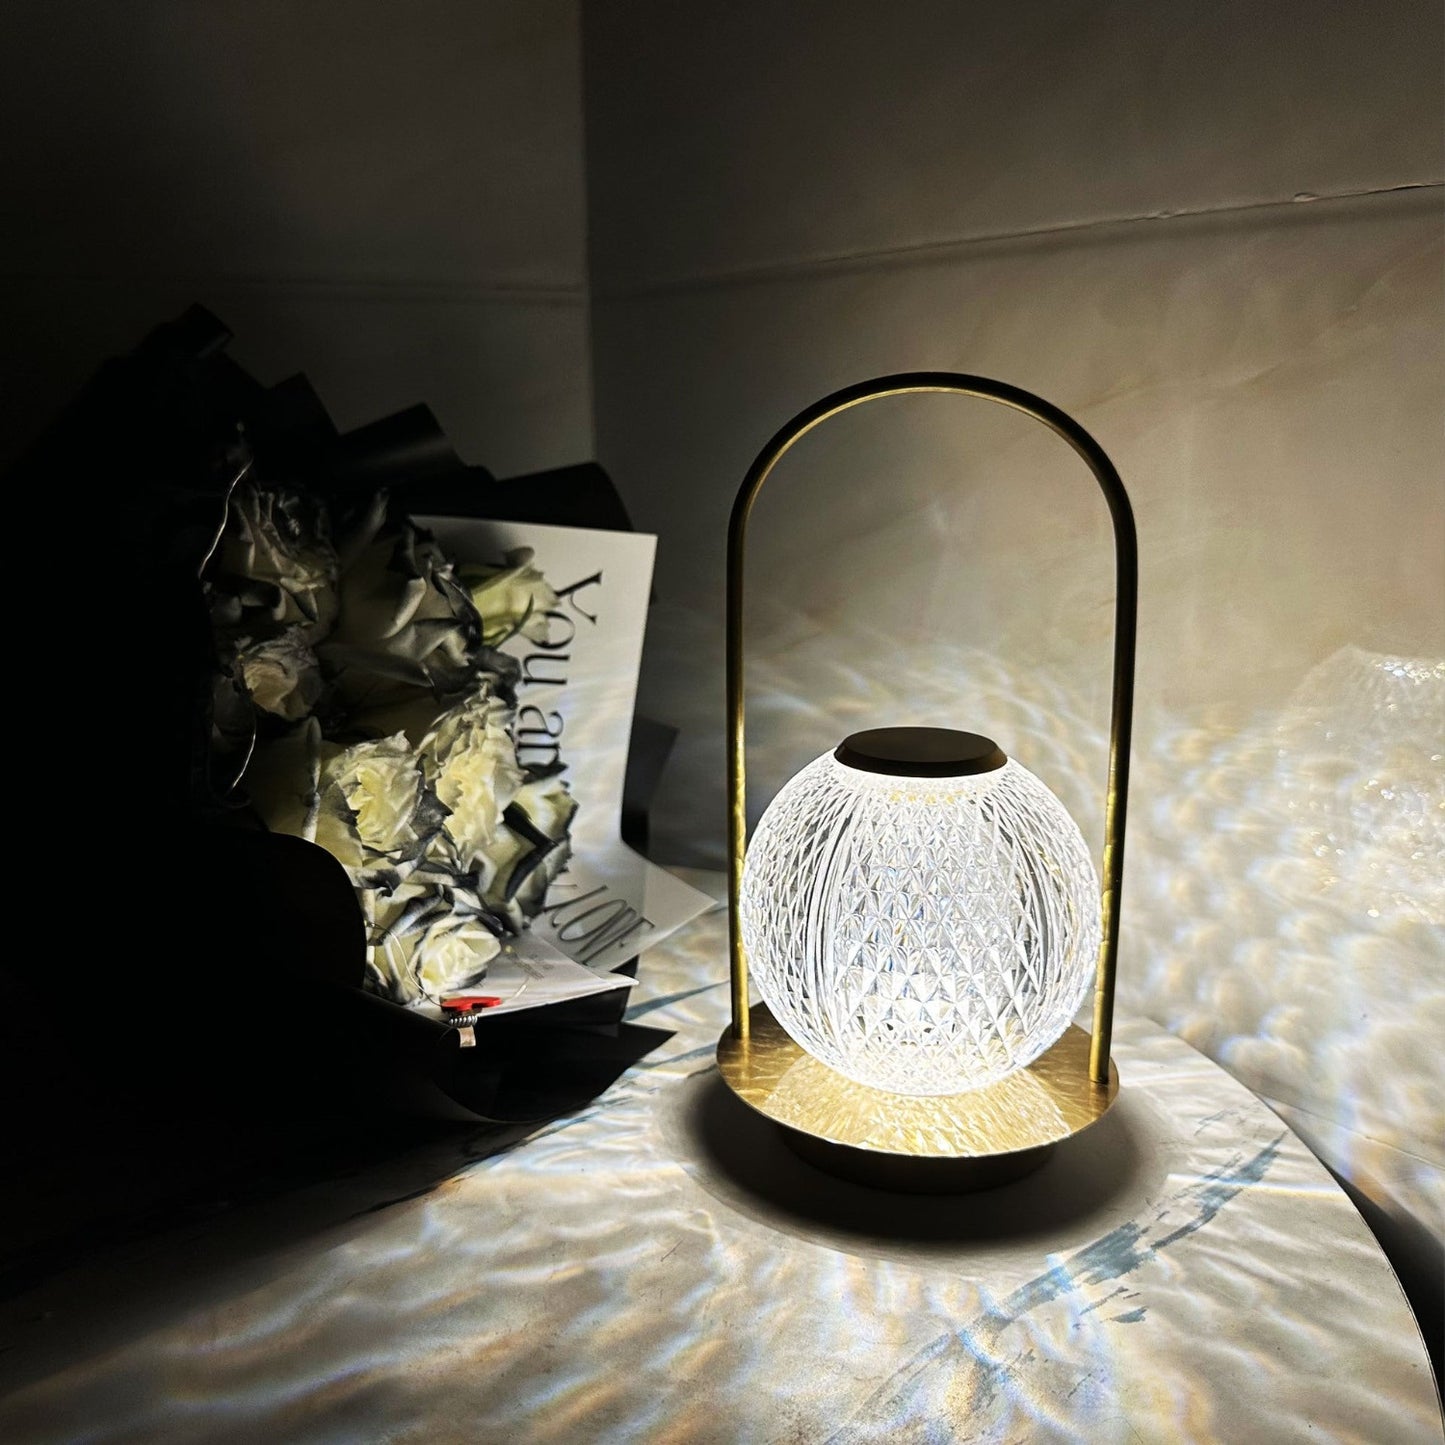 Retro Ambient Night Light on Nightstand - A vintage-inspired night light radiating a warm, nostalgic glow, perfect for creating a cozy and inviting ambiance.